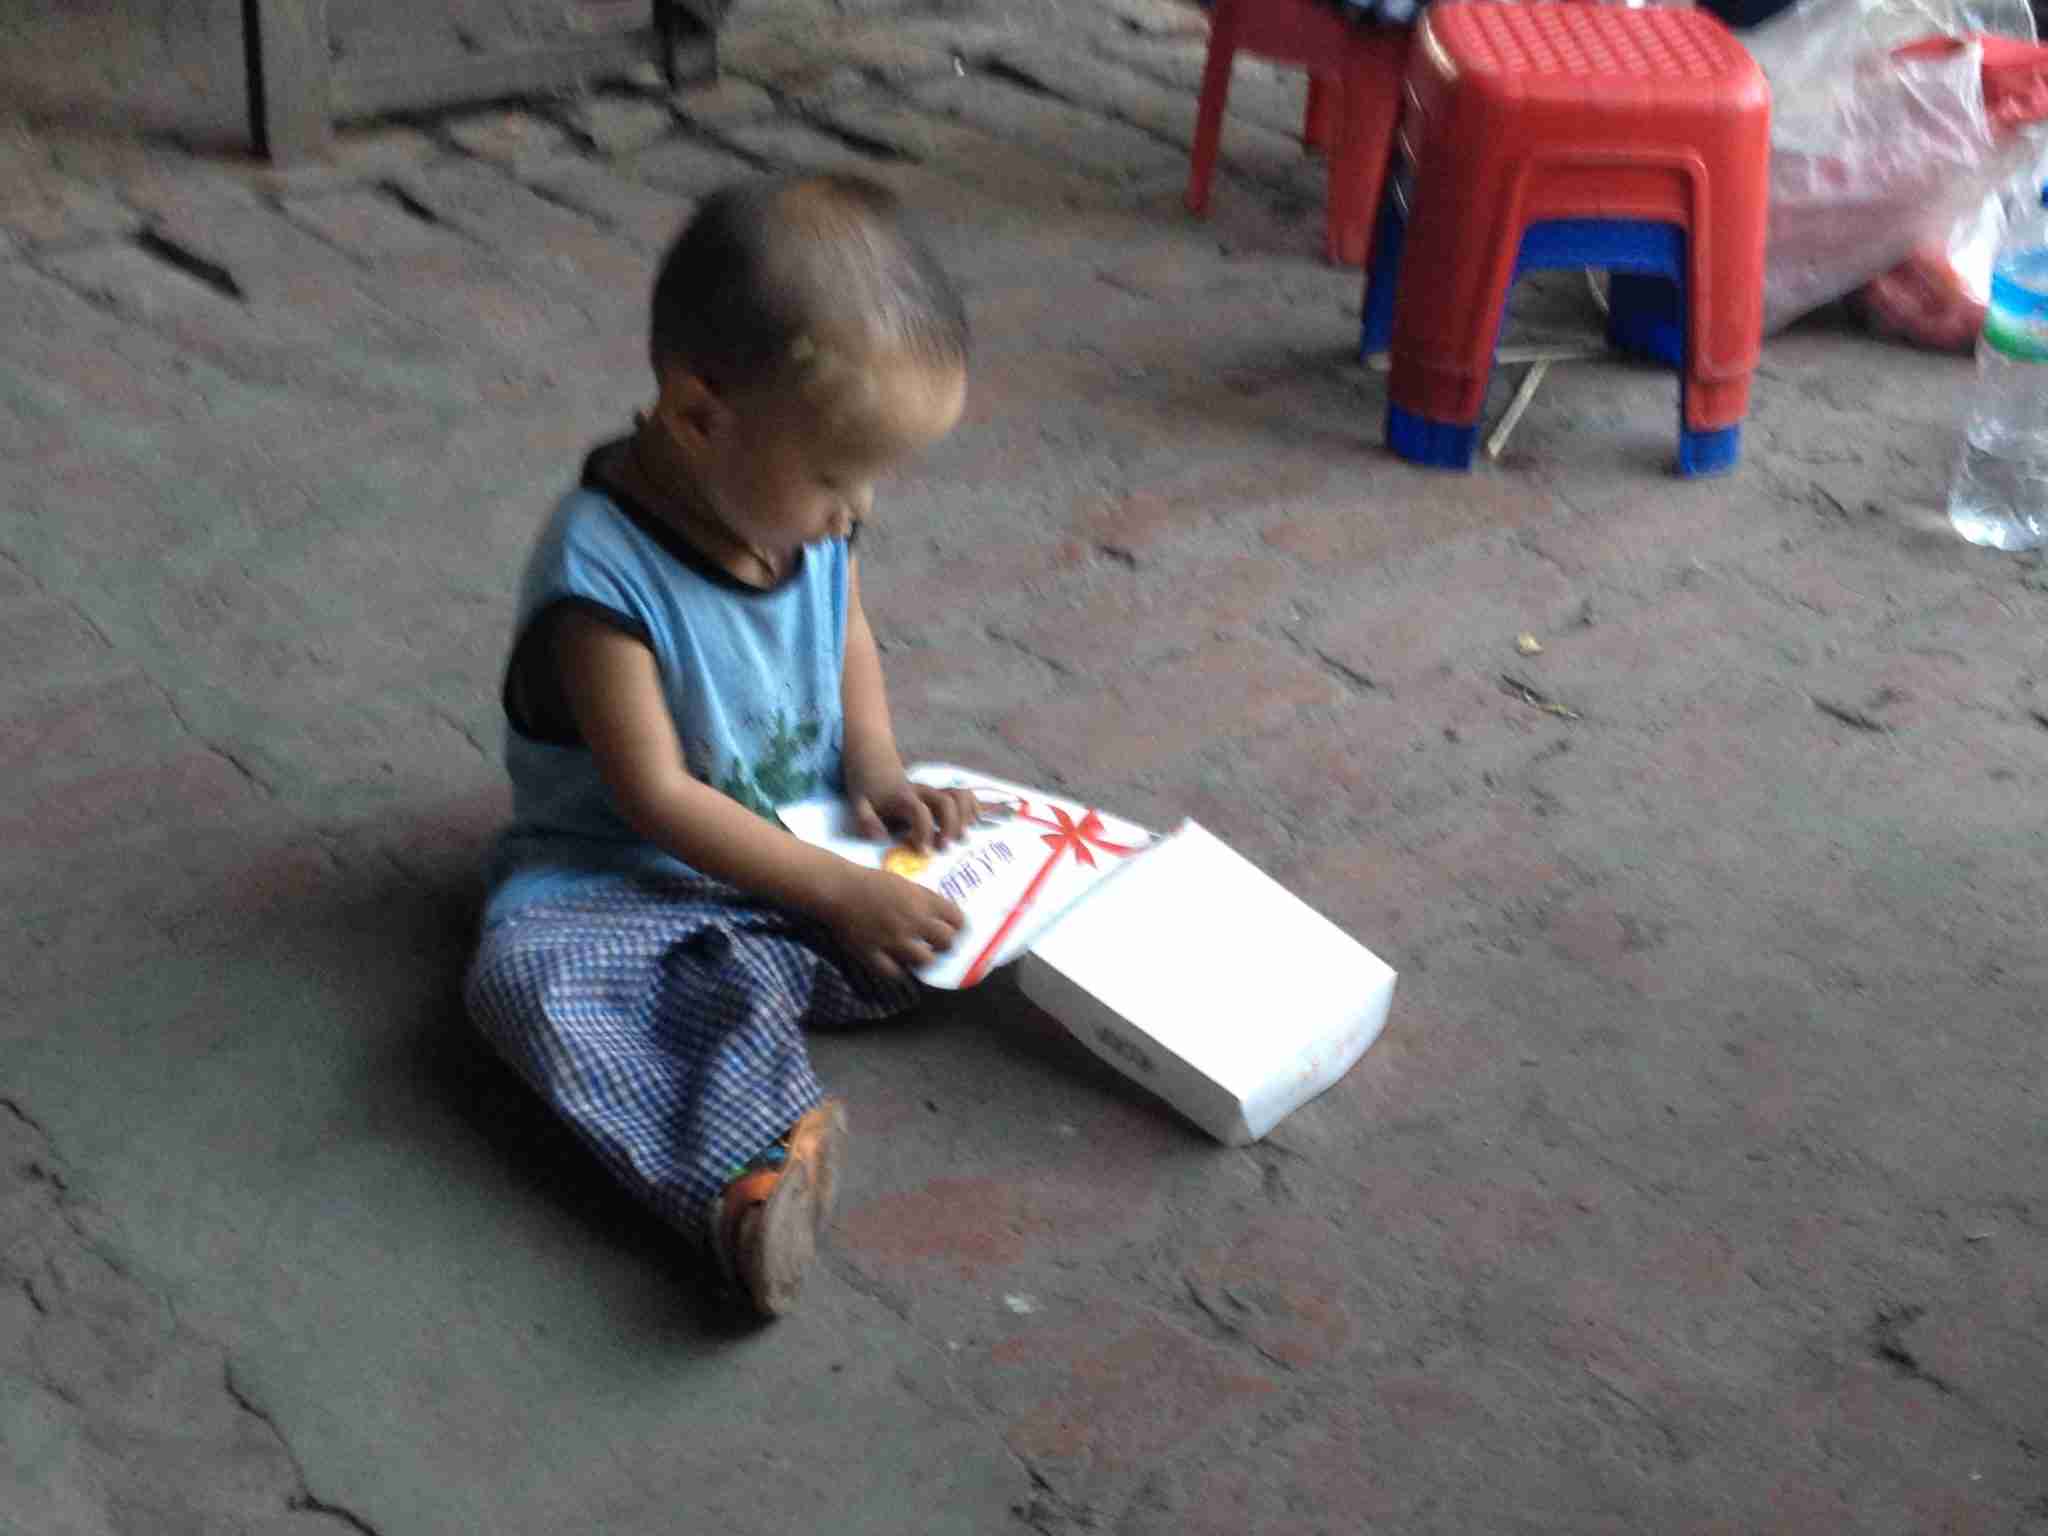 Child playing with box